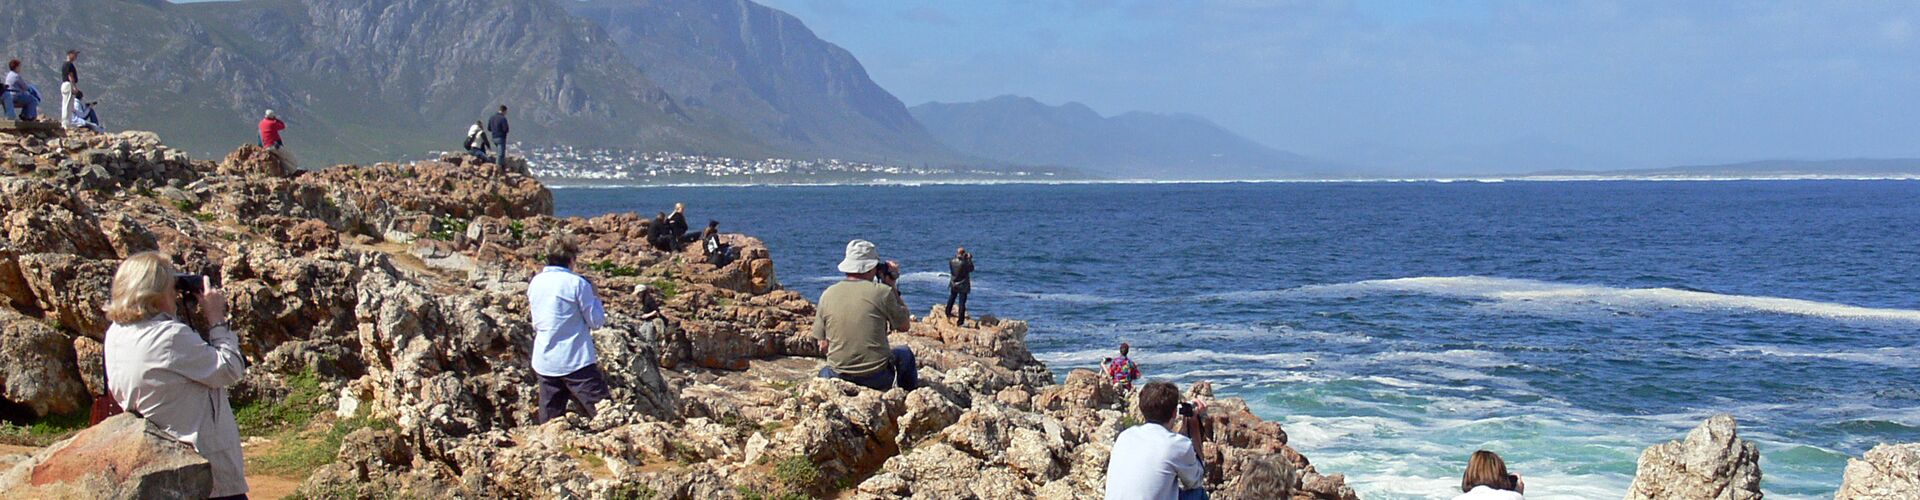 People whale watching on the cliff paths on the coast of Hermanus, South Africa